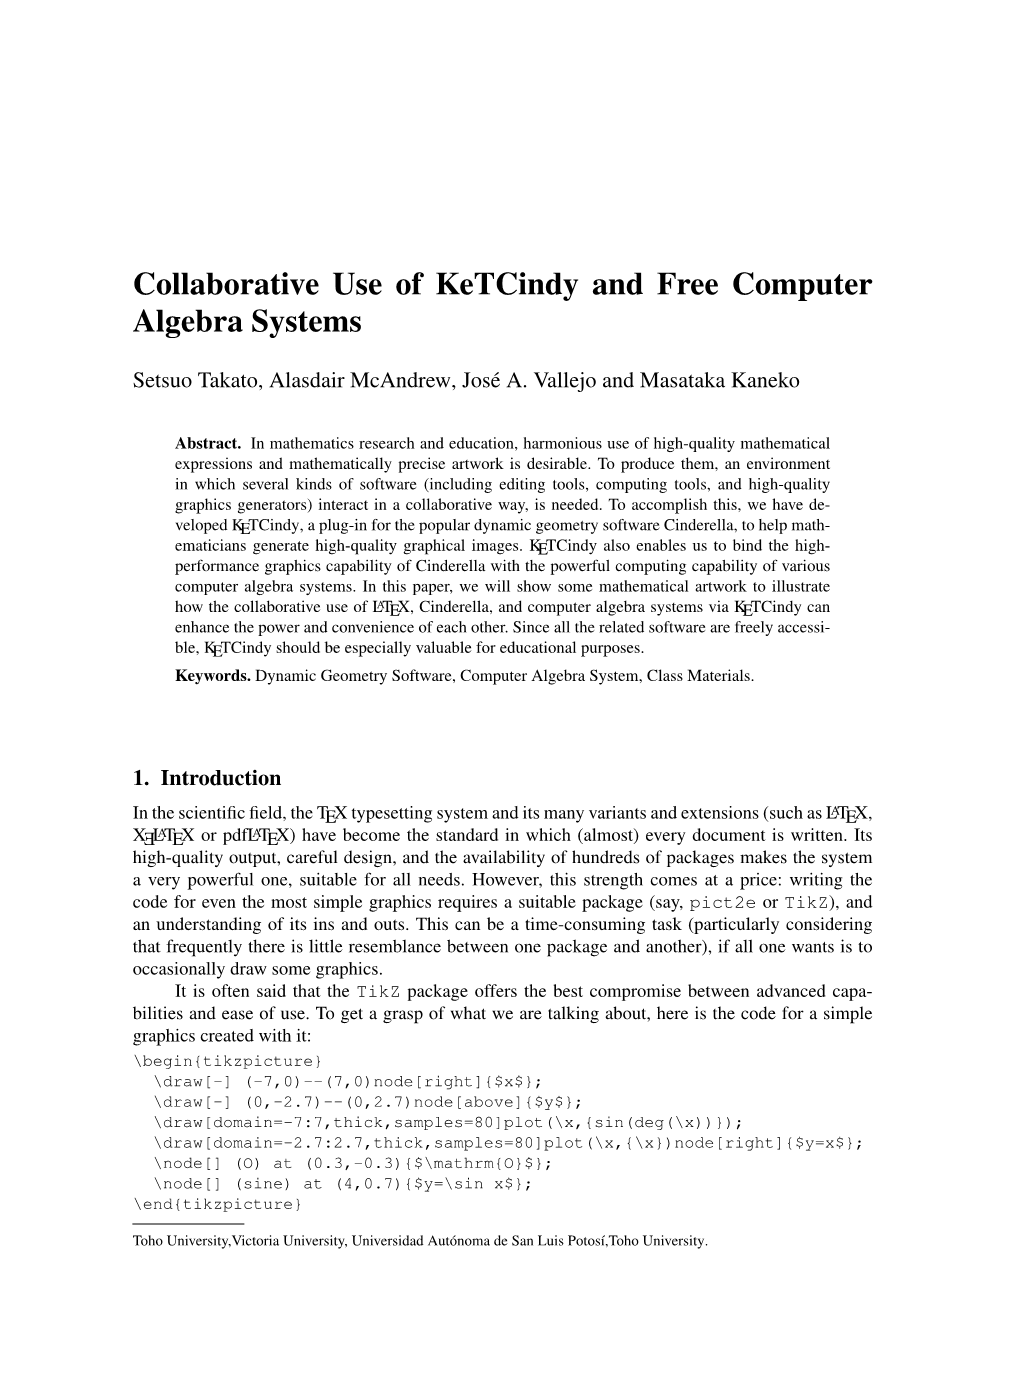 Collaborative Use of Ketcindy and Free Computer Algebra Systems